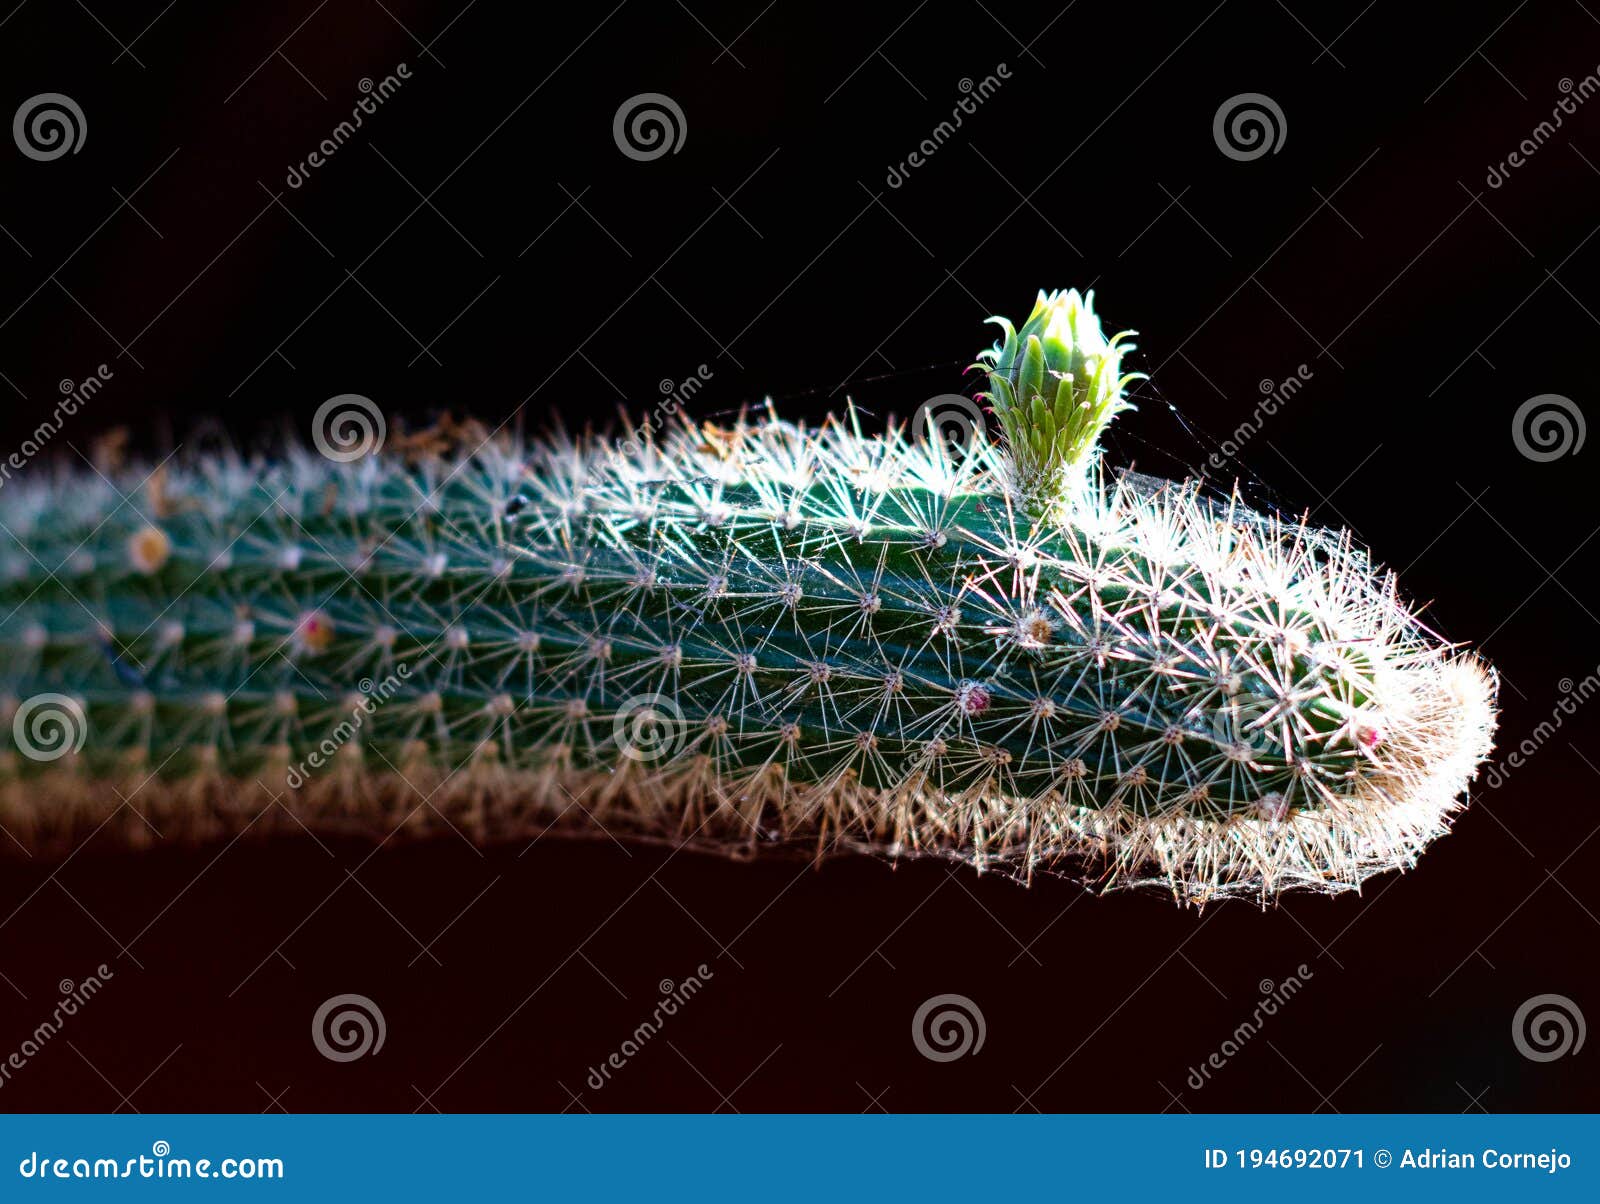 birth of a flower in a cactus